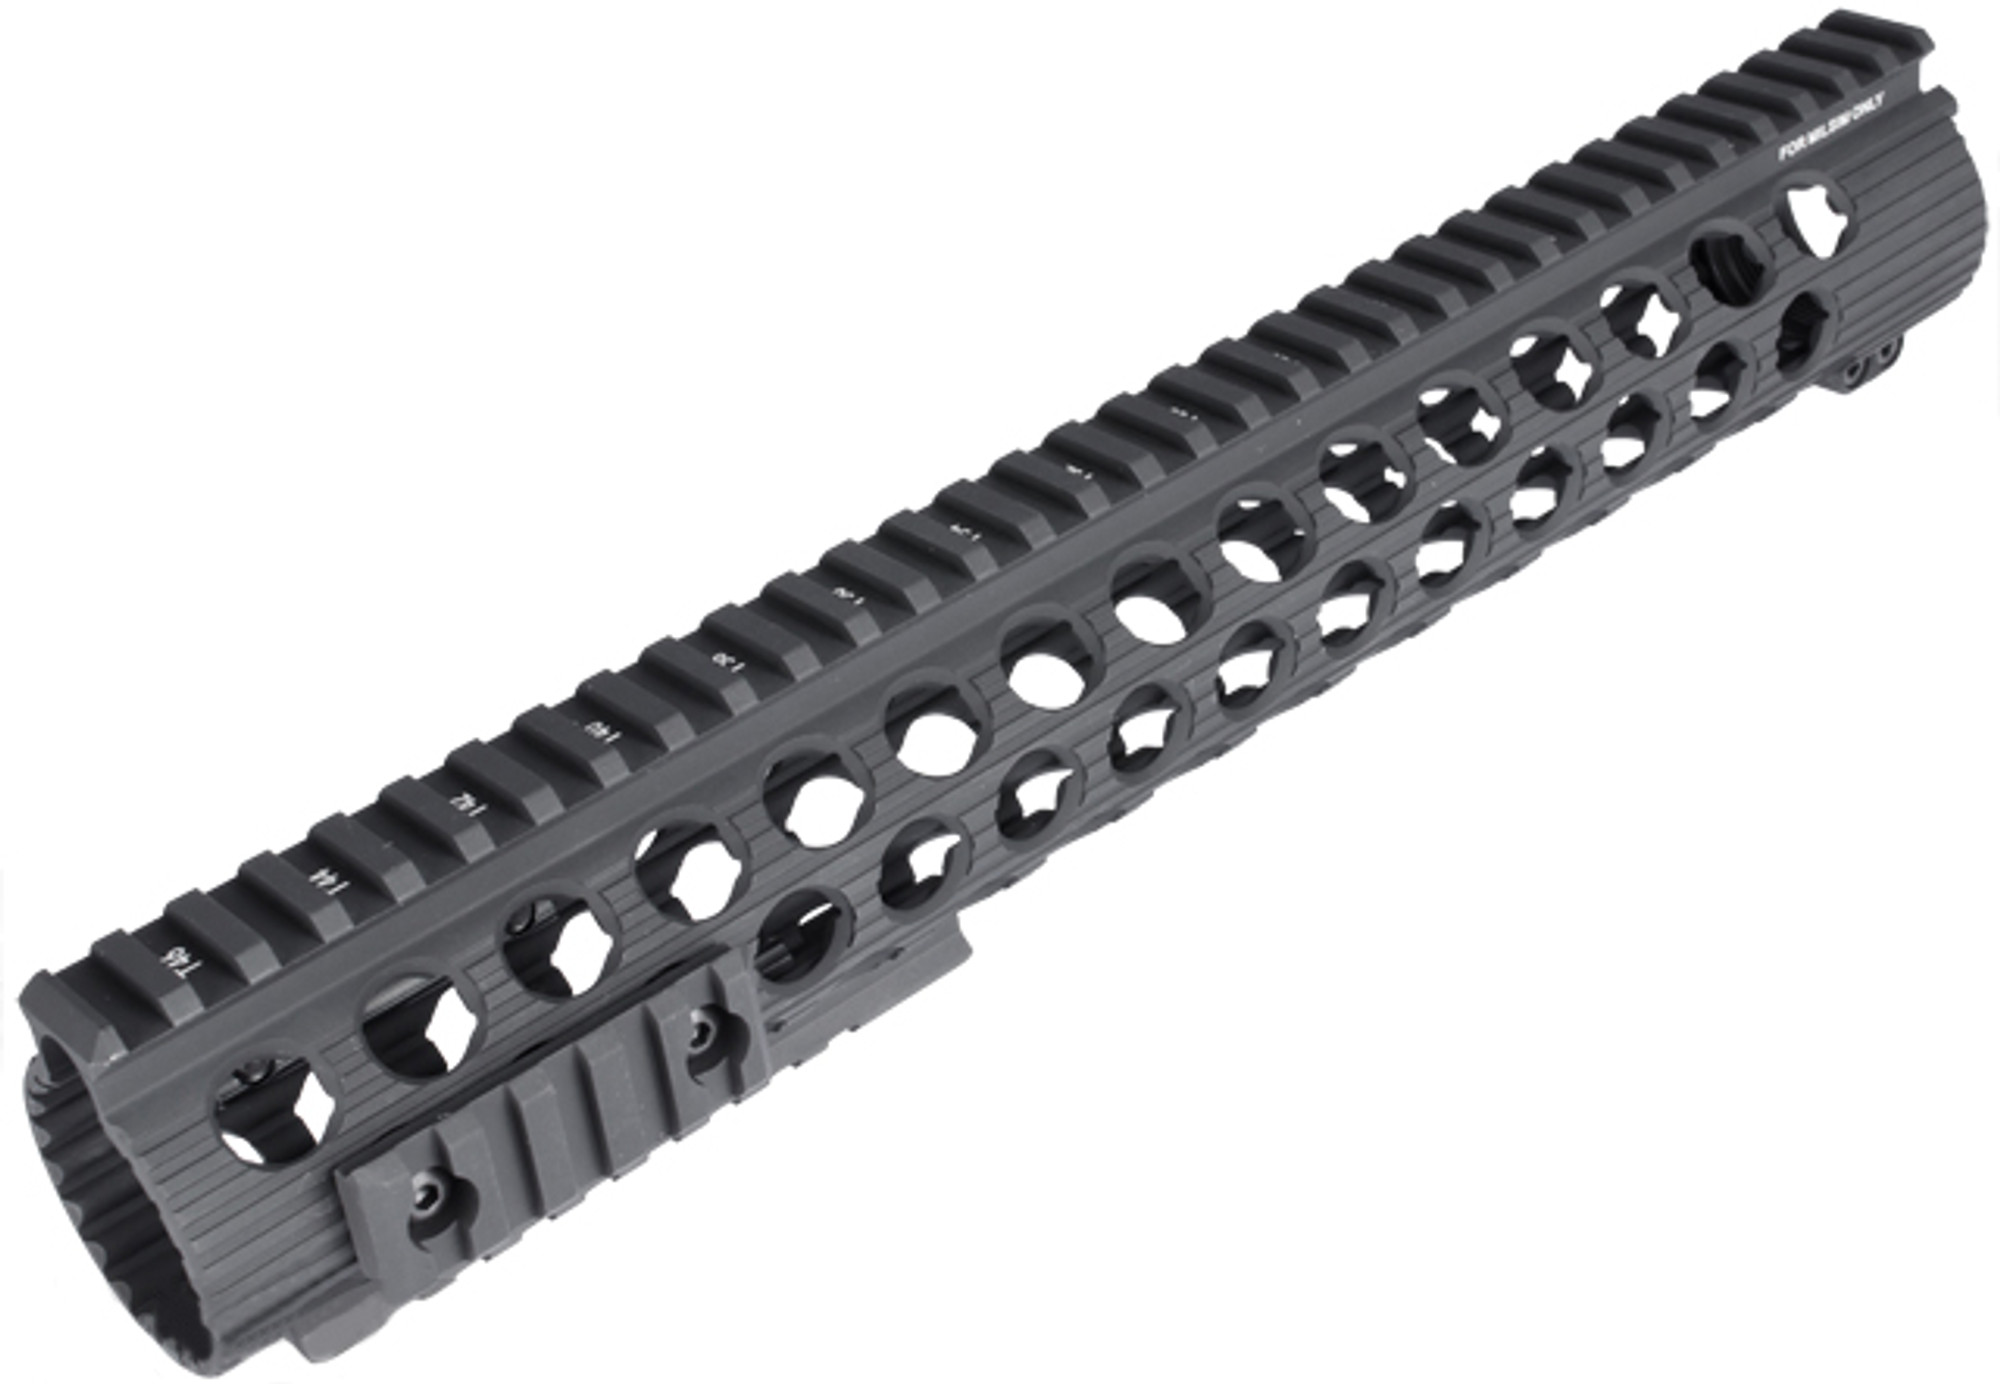 Madbull Airsoft Official Licensed Troy Industries TRX Battle Rail 13" for Airsoft M4/M16 Series AEGs (Black)